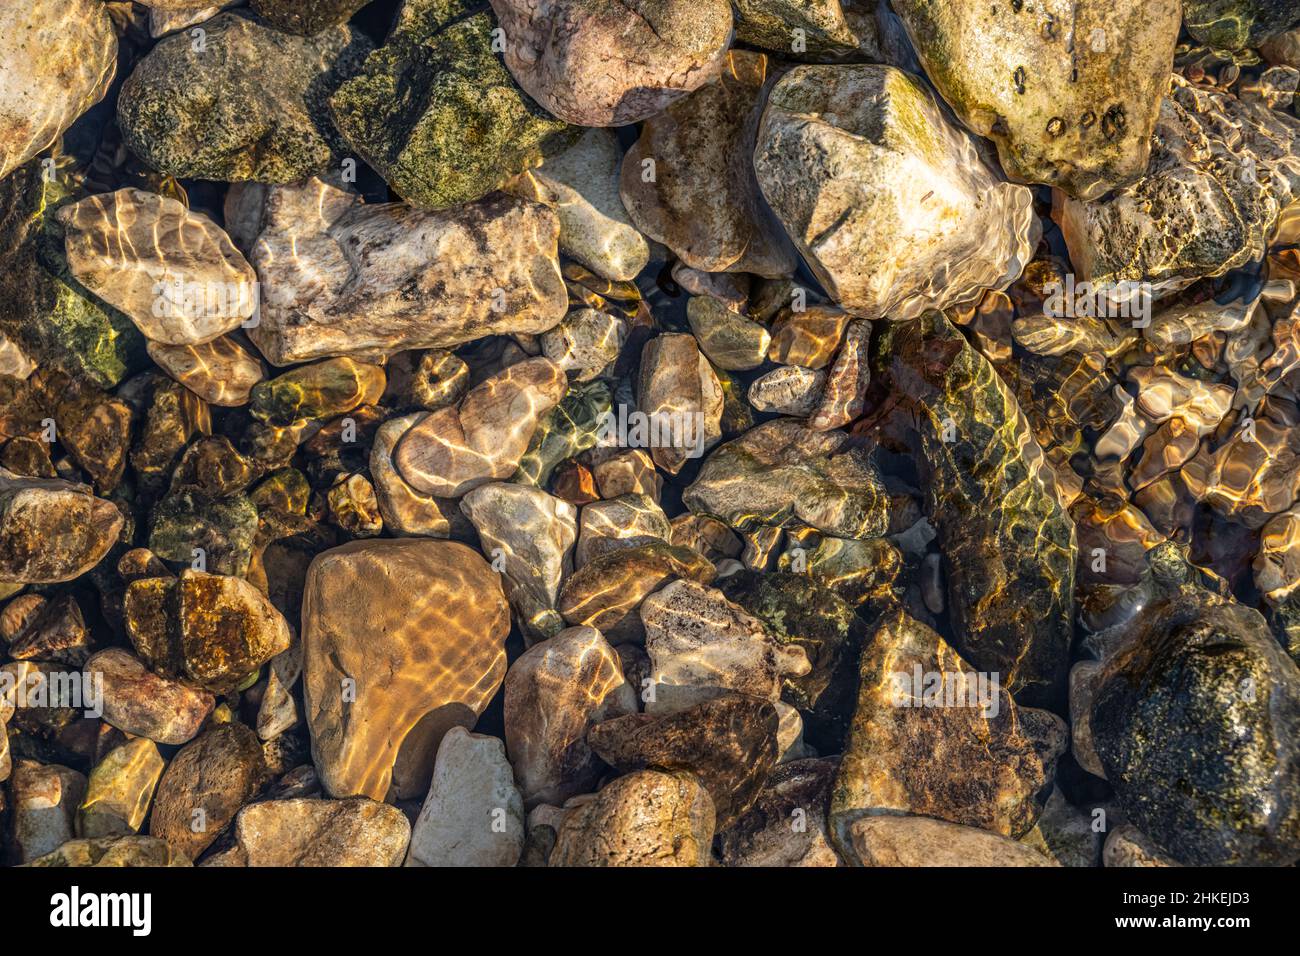 Creek stones in the Crystal clear water of South Sylamore Creek in the Ozark Mountains at Mountain View, Arkansas. (USA) Stock Photo